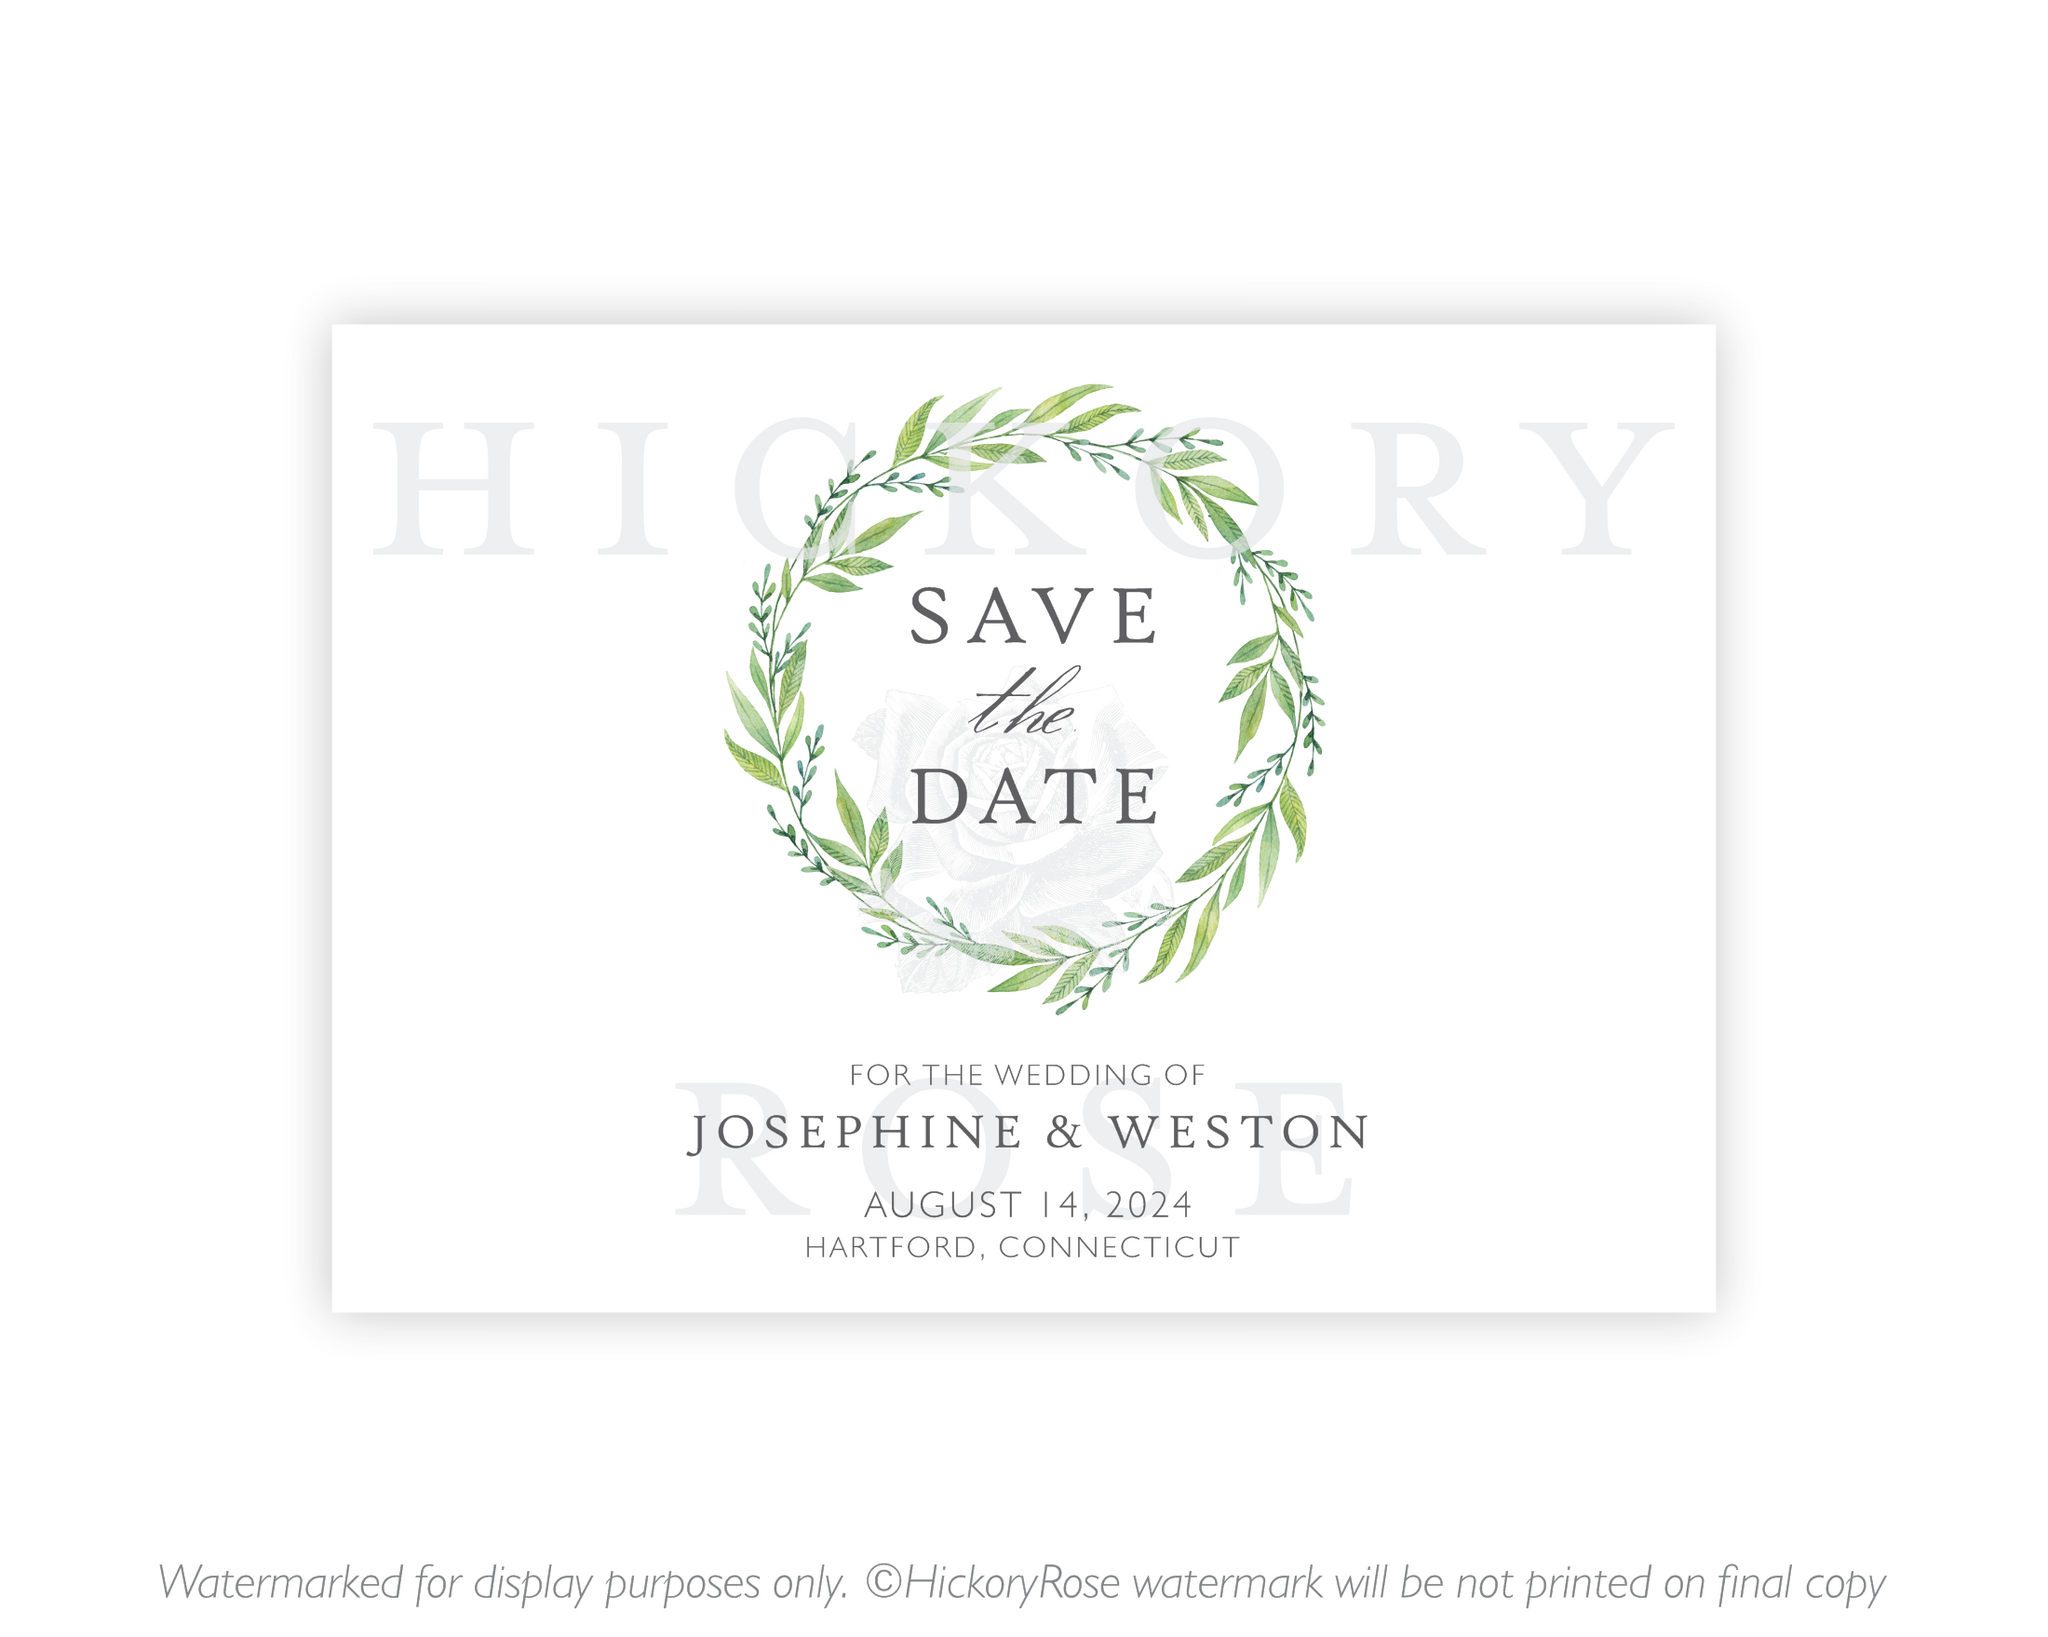 Wreath of Green | Save the Date Cards